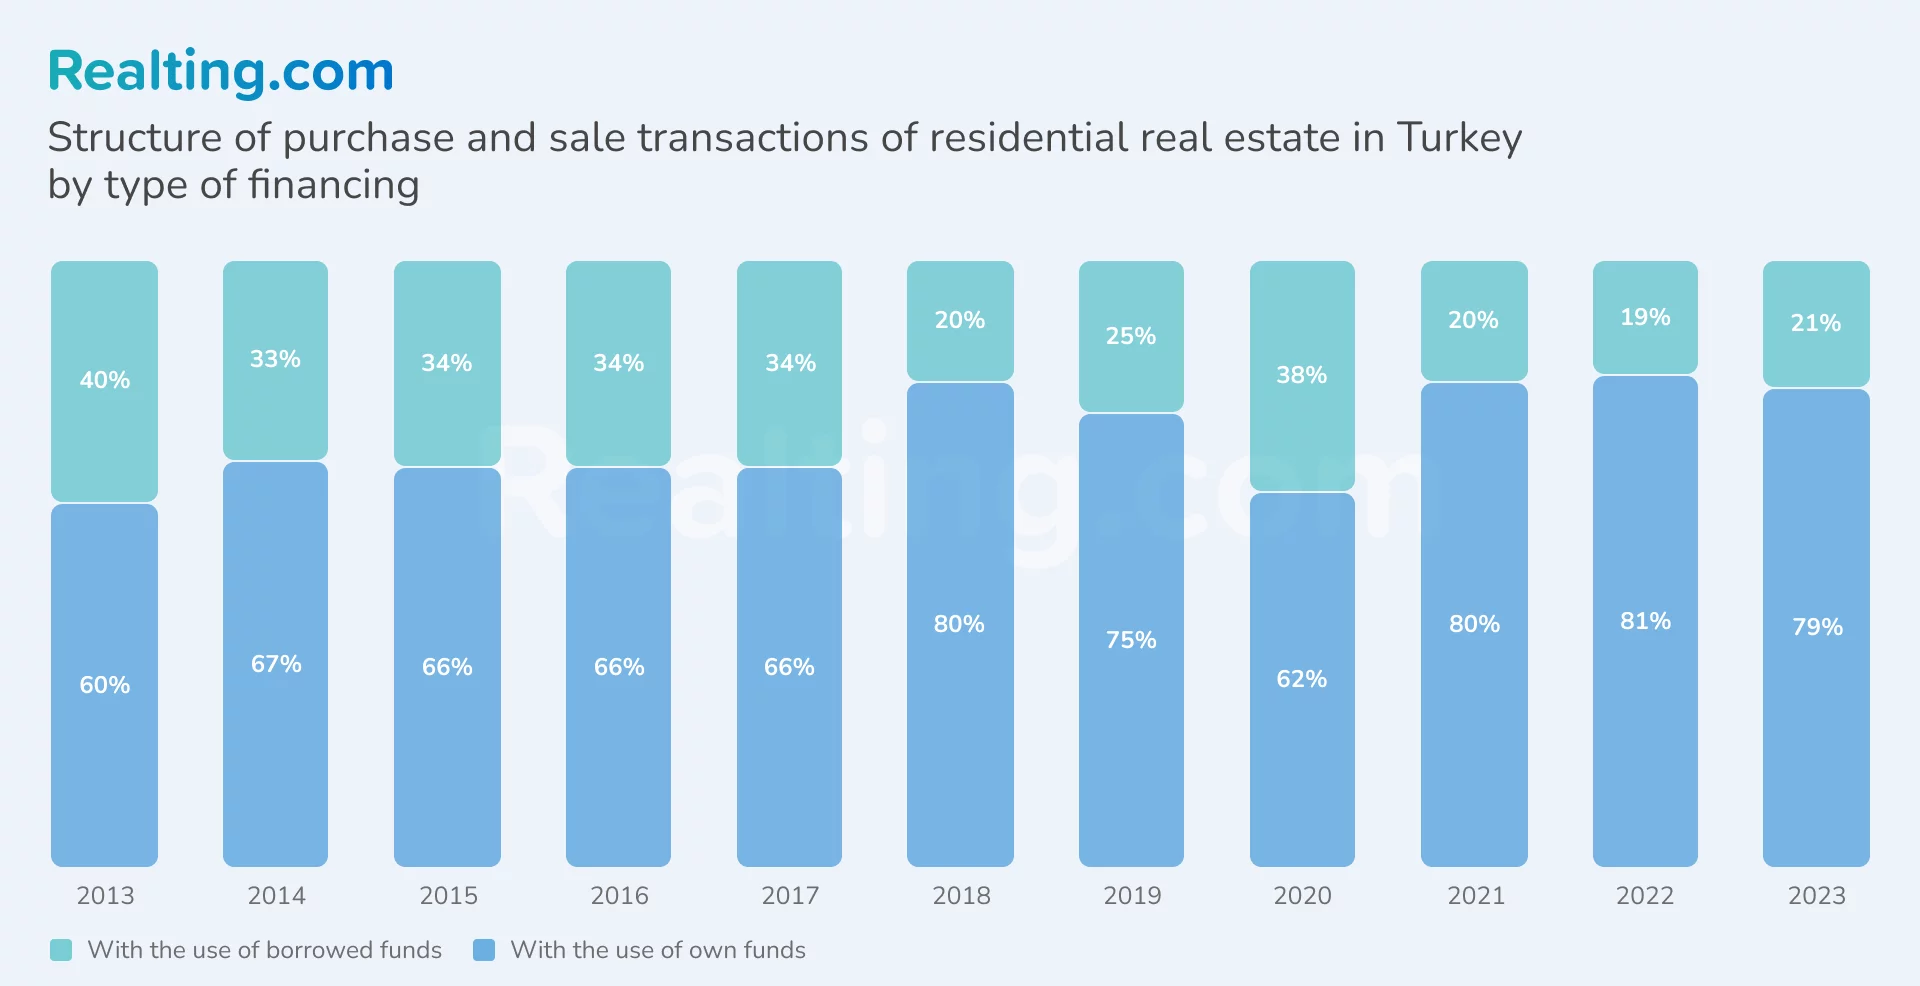 Structure of purchase and sale transactions of residential real estate in Turkey by type of financing